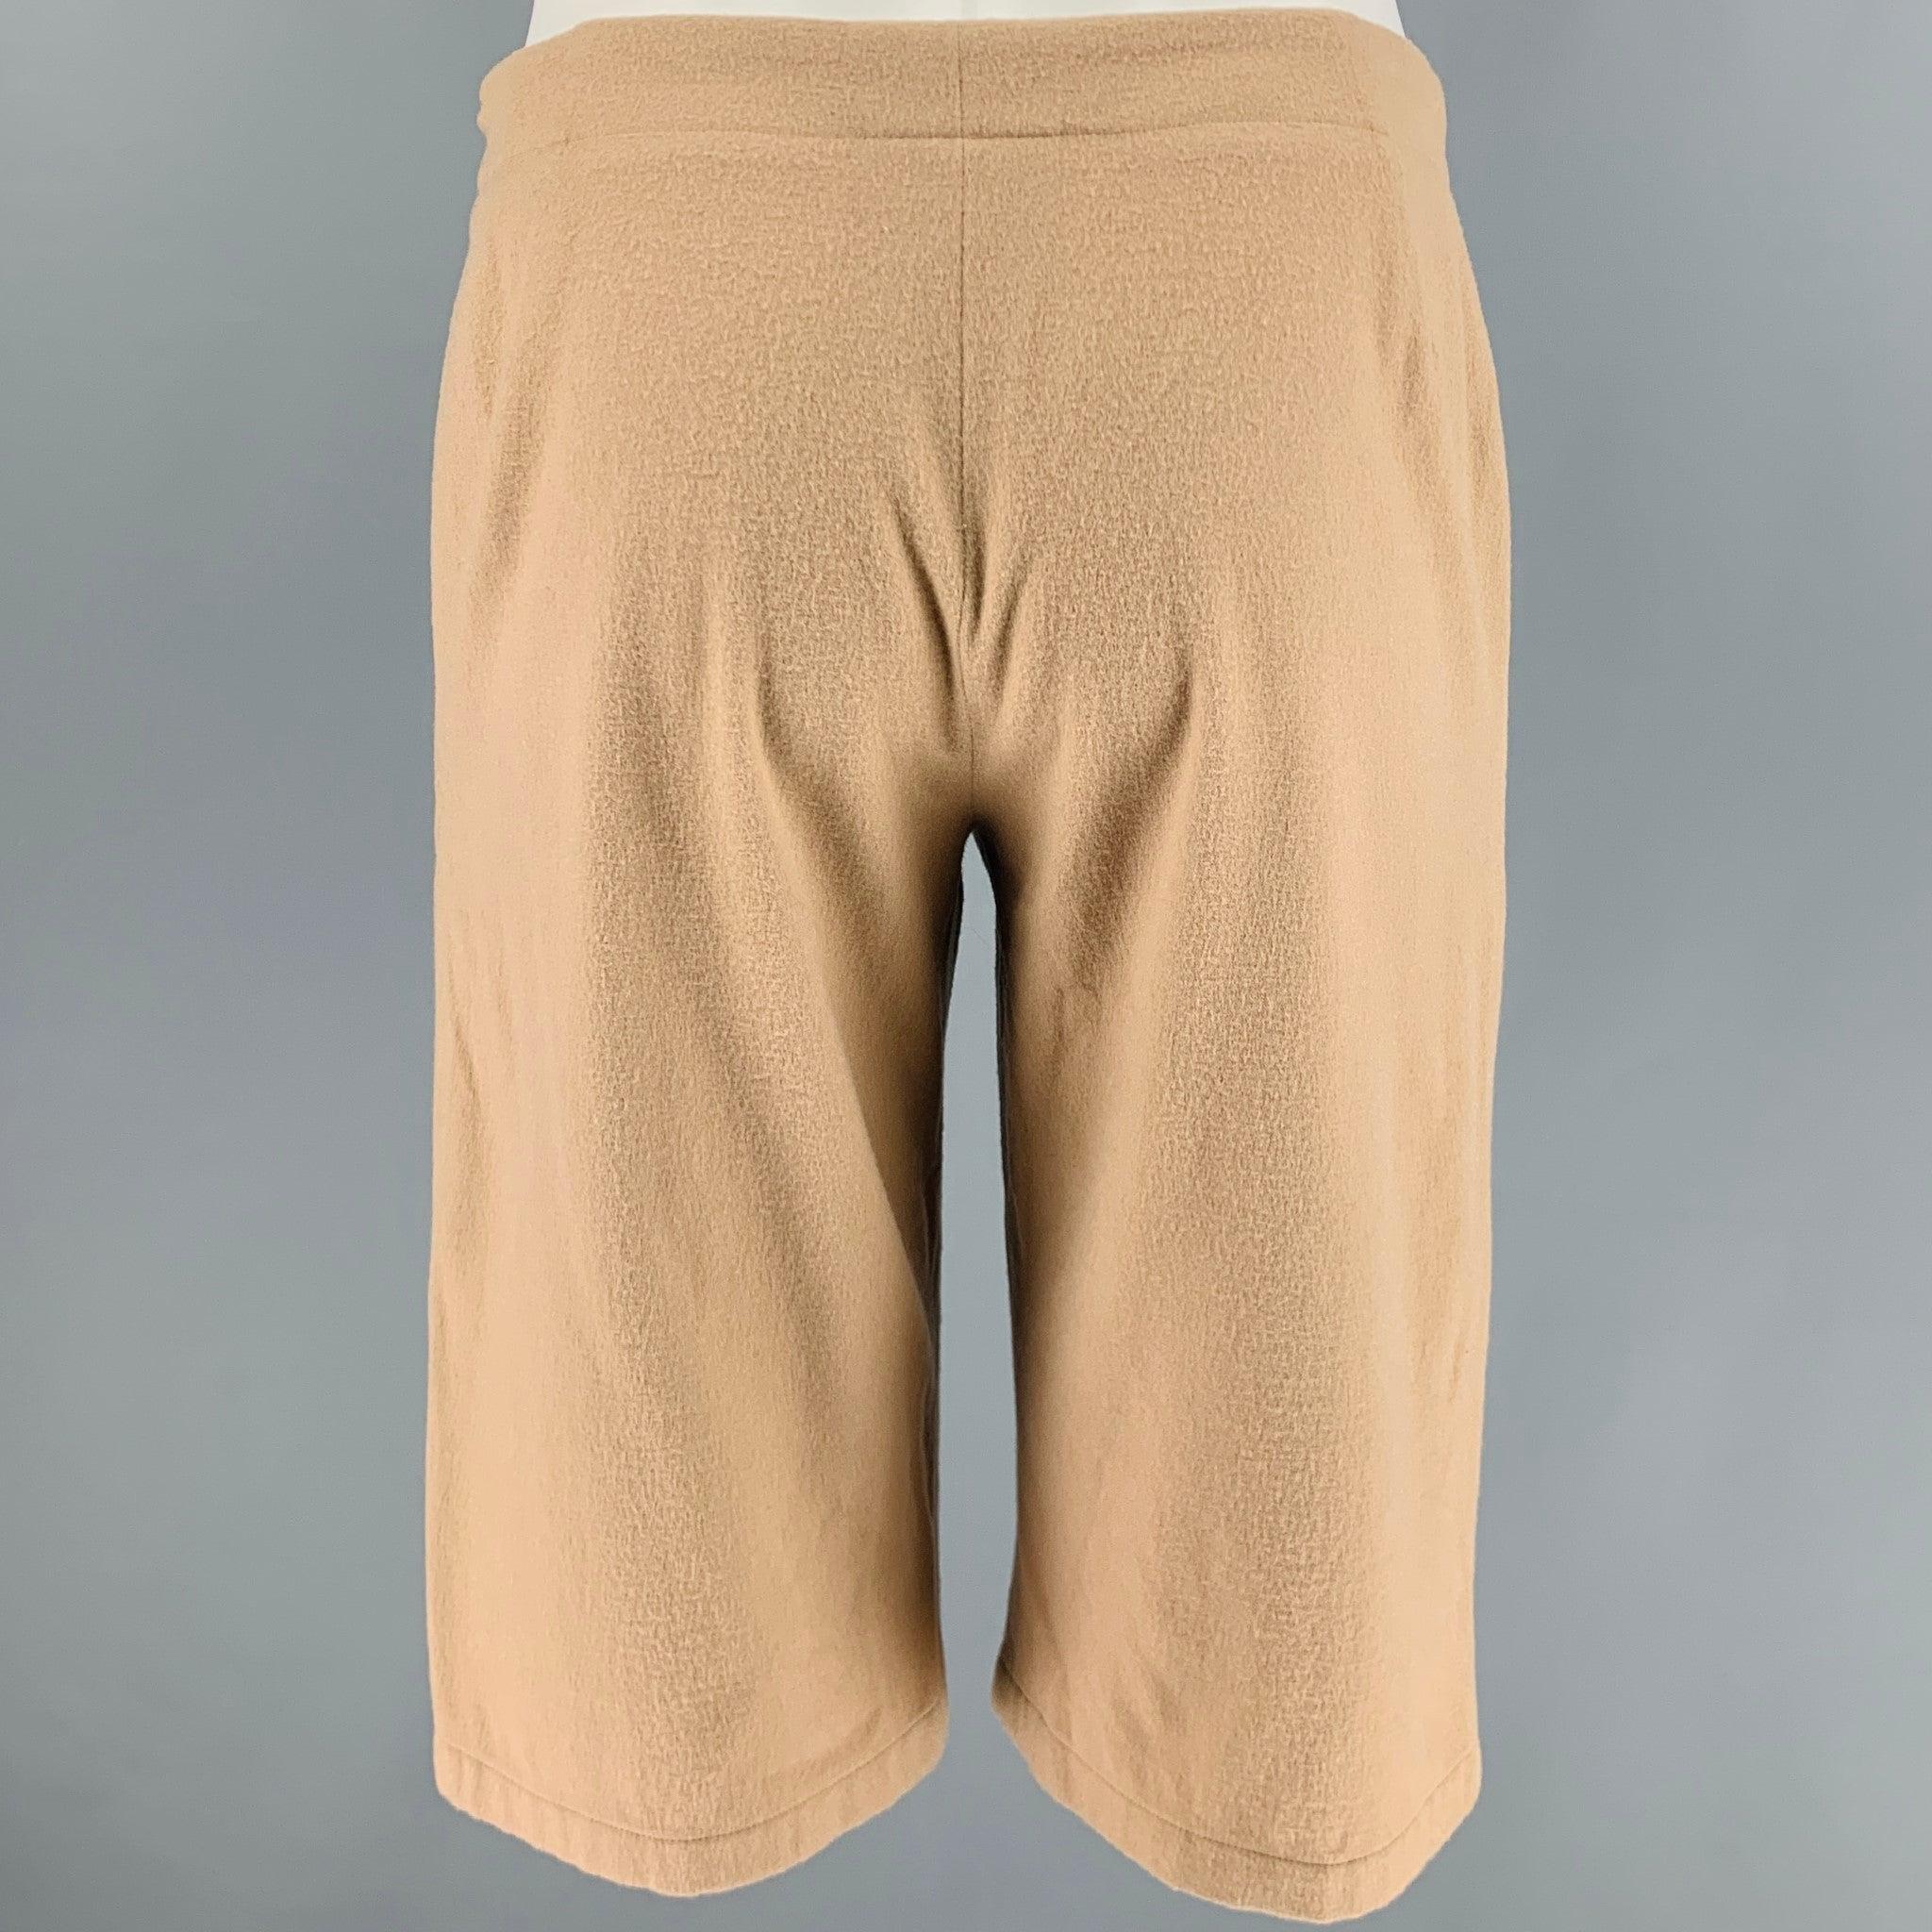 JIL SANDER shorts
in a camel wool blend fabric featuring a bermuda length, flat front style, and zip fly closure. Made in Italy.Very Good Pre-Owned Condition. Moderate signs of wear. 

Marked:   38 

Measurements: 
  Waist: 29 inches Rise: 9 inches